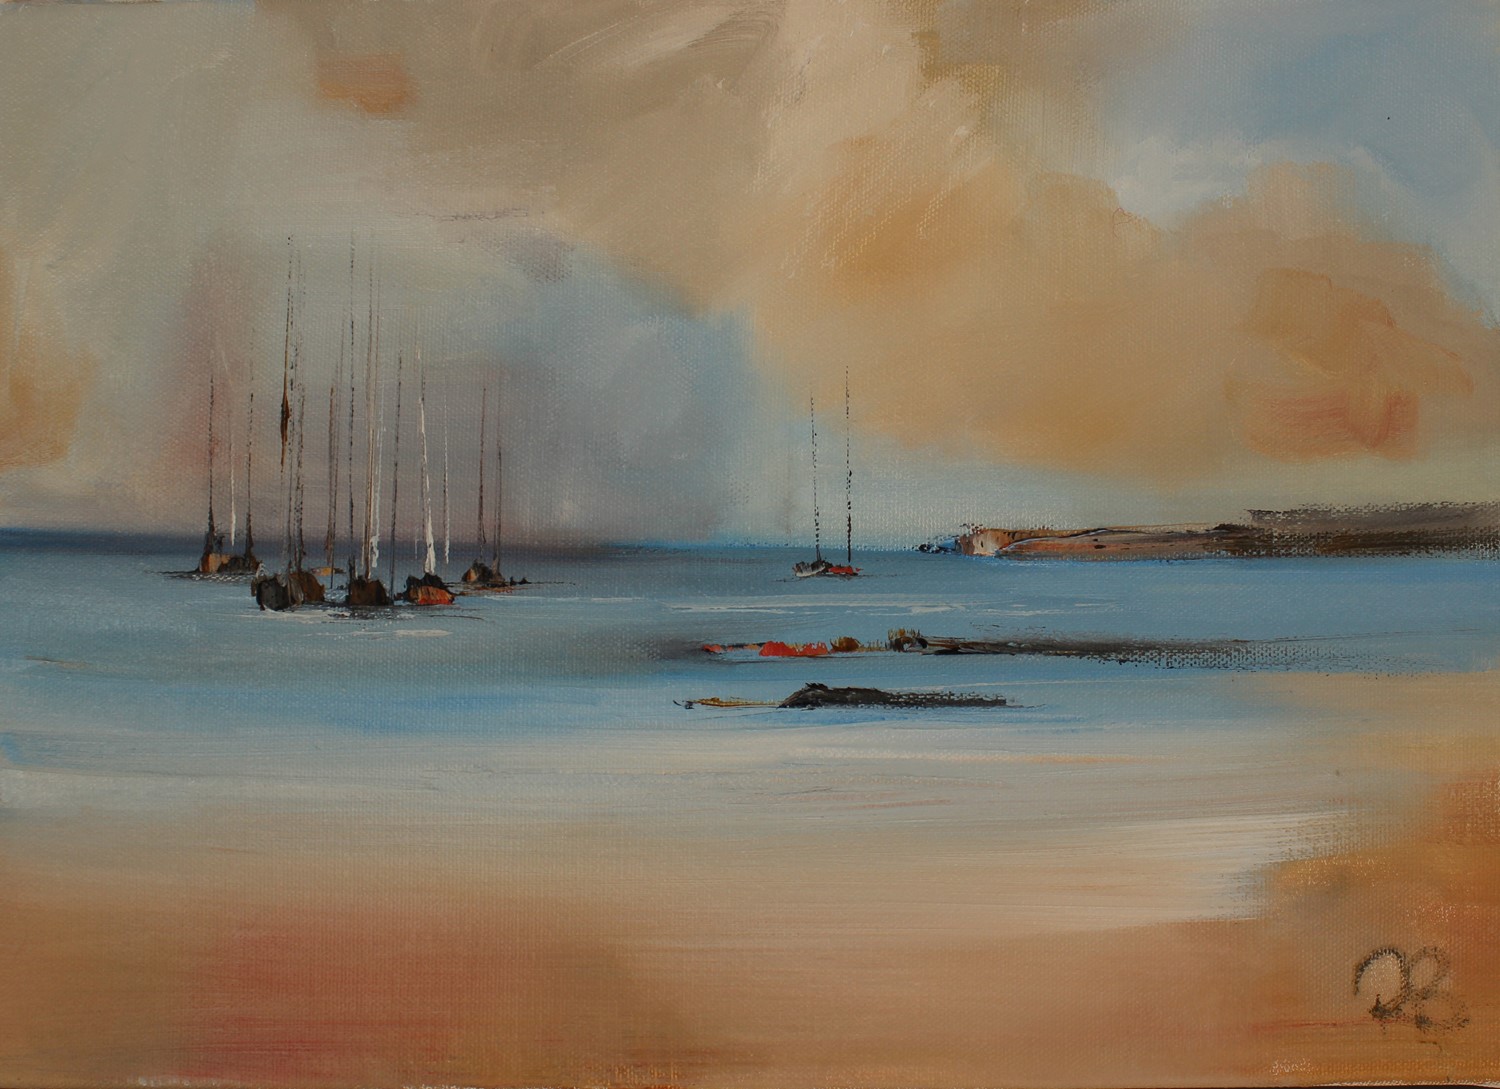 'A Gathering of Boats' by artist Rosanne Barr